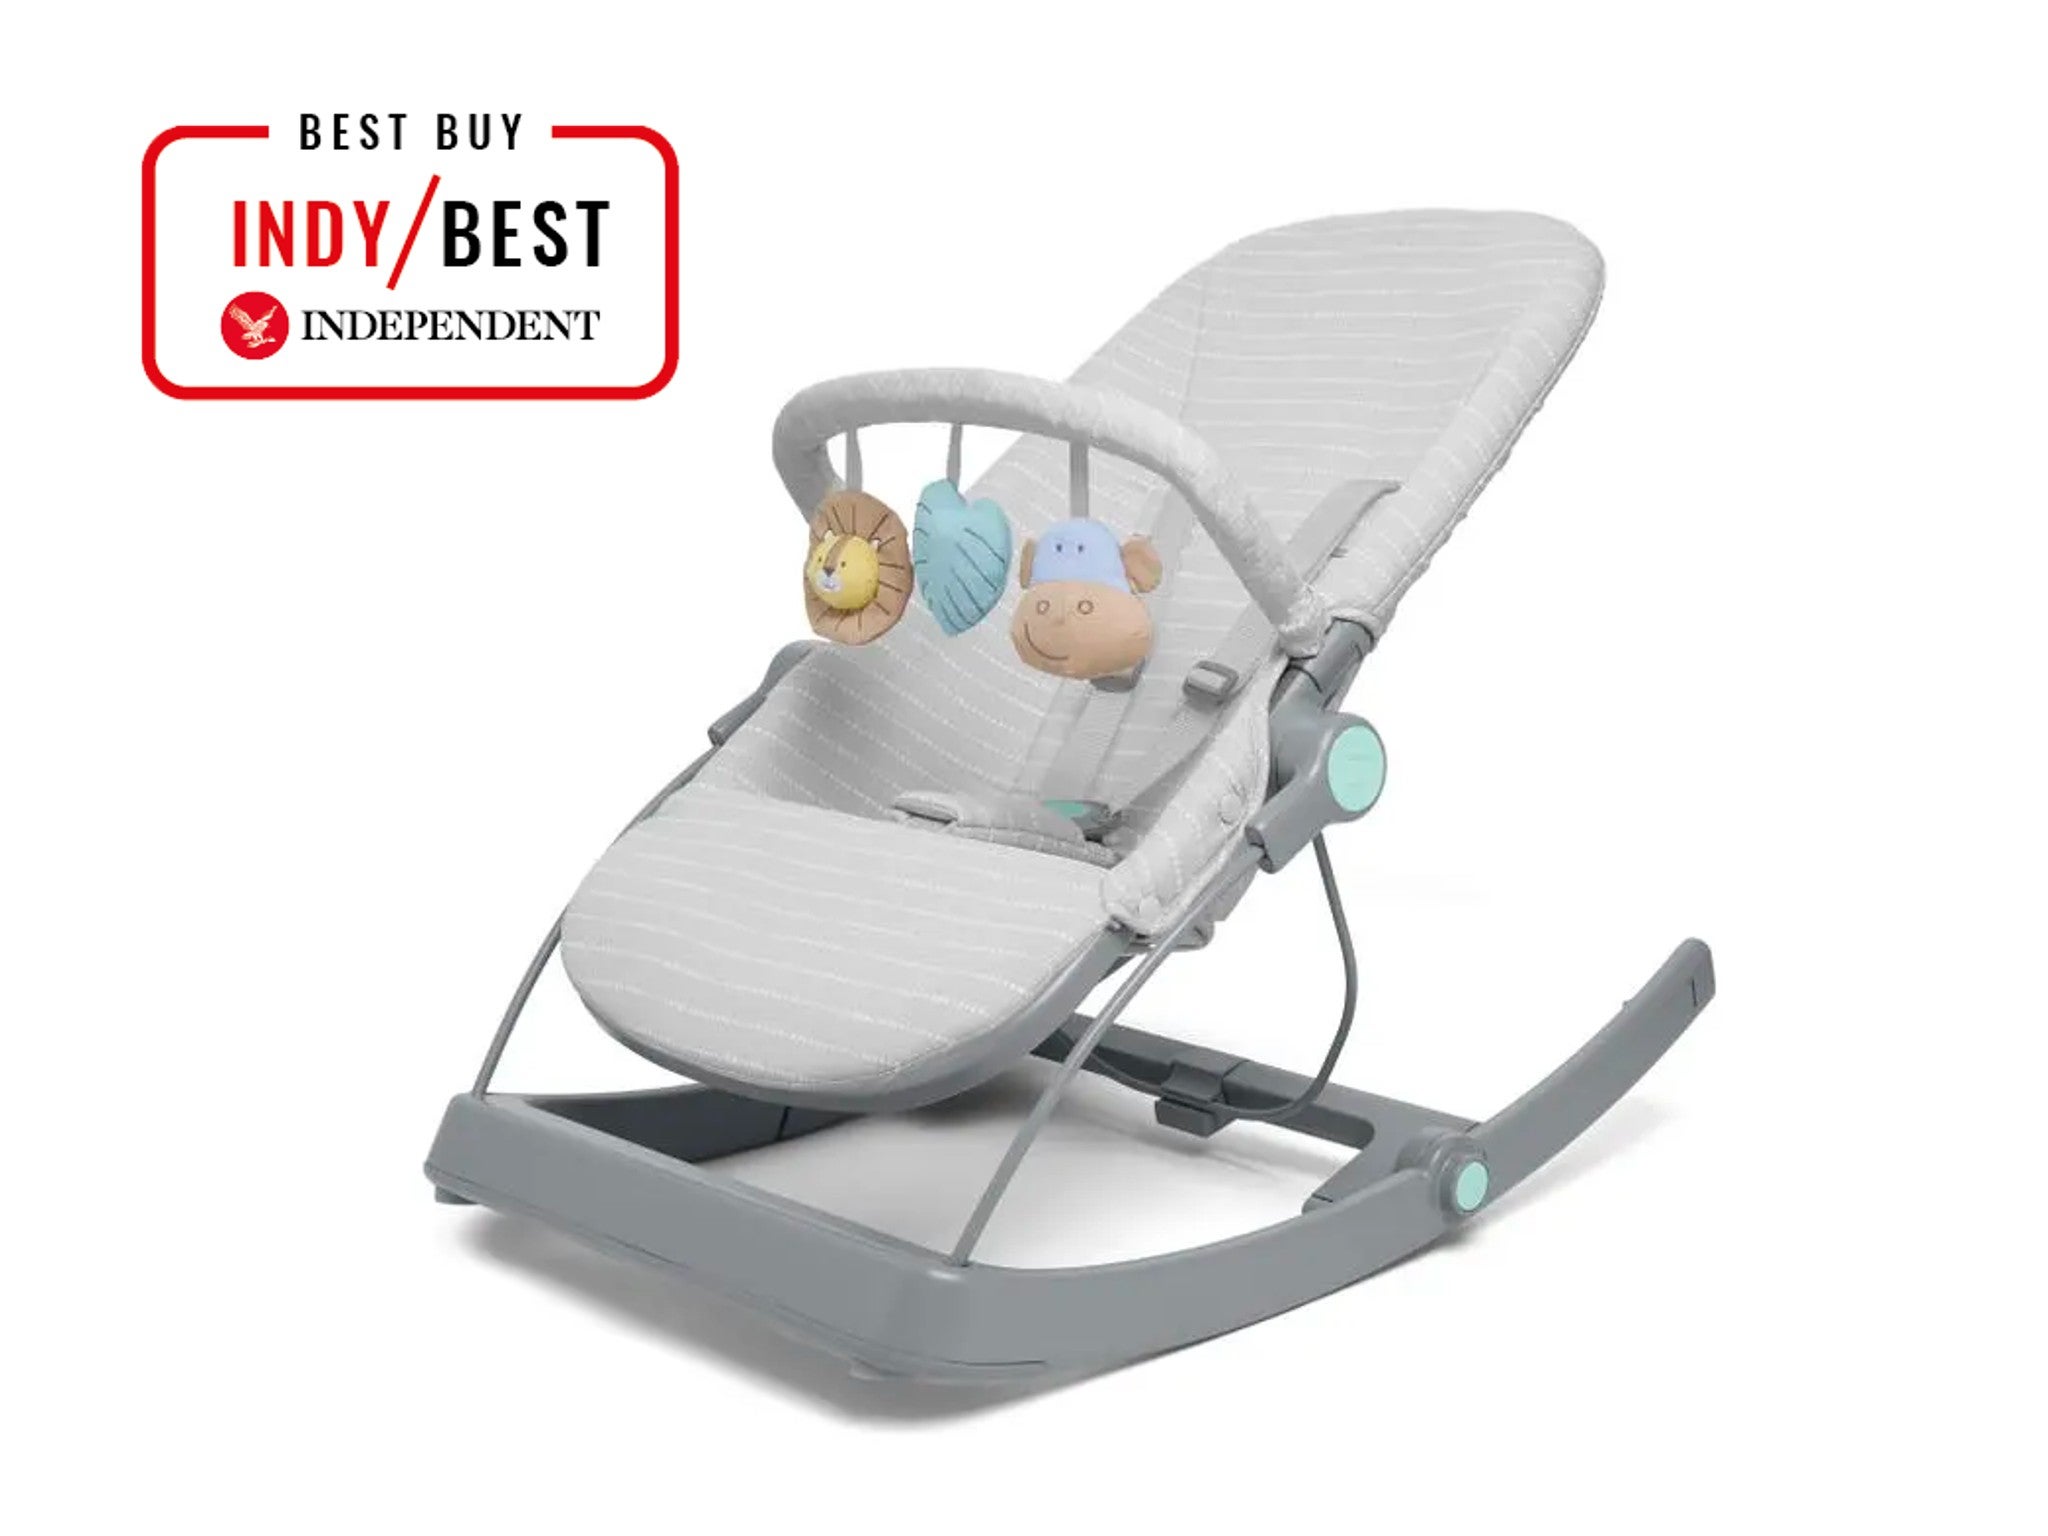 Aden + Anais transition seat baby bouncer and rocker indybest